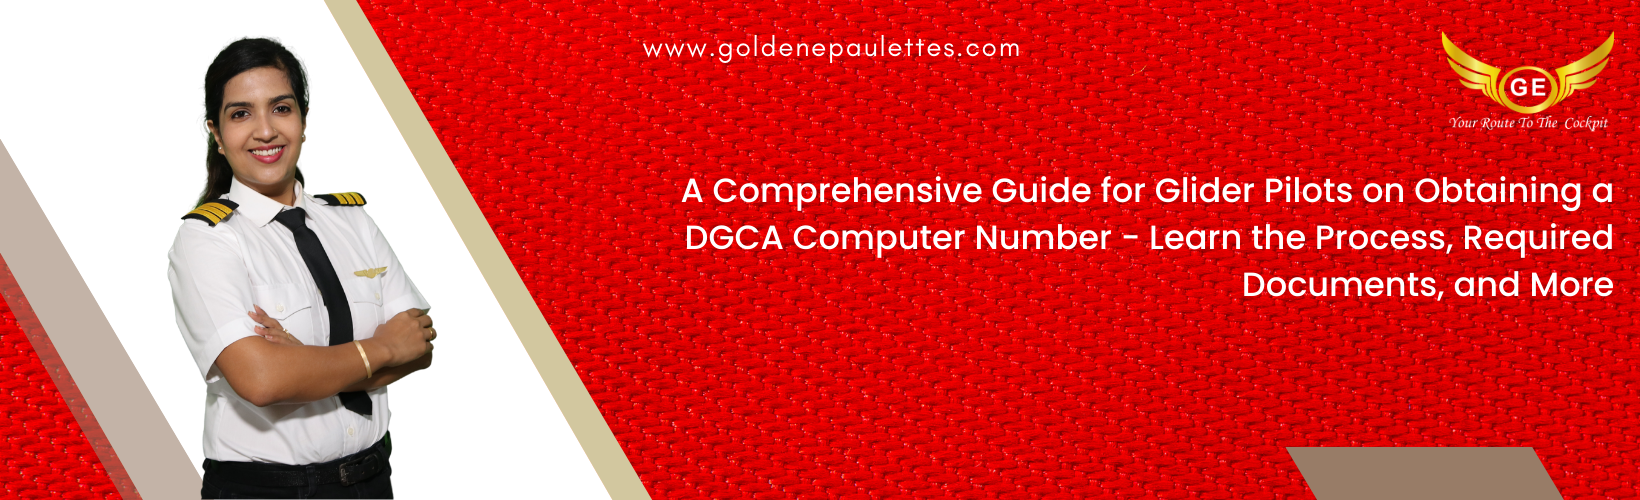 A Quick Guide to Obtaining a DGCA Computer Number for Glider Pilots